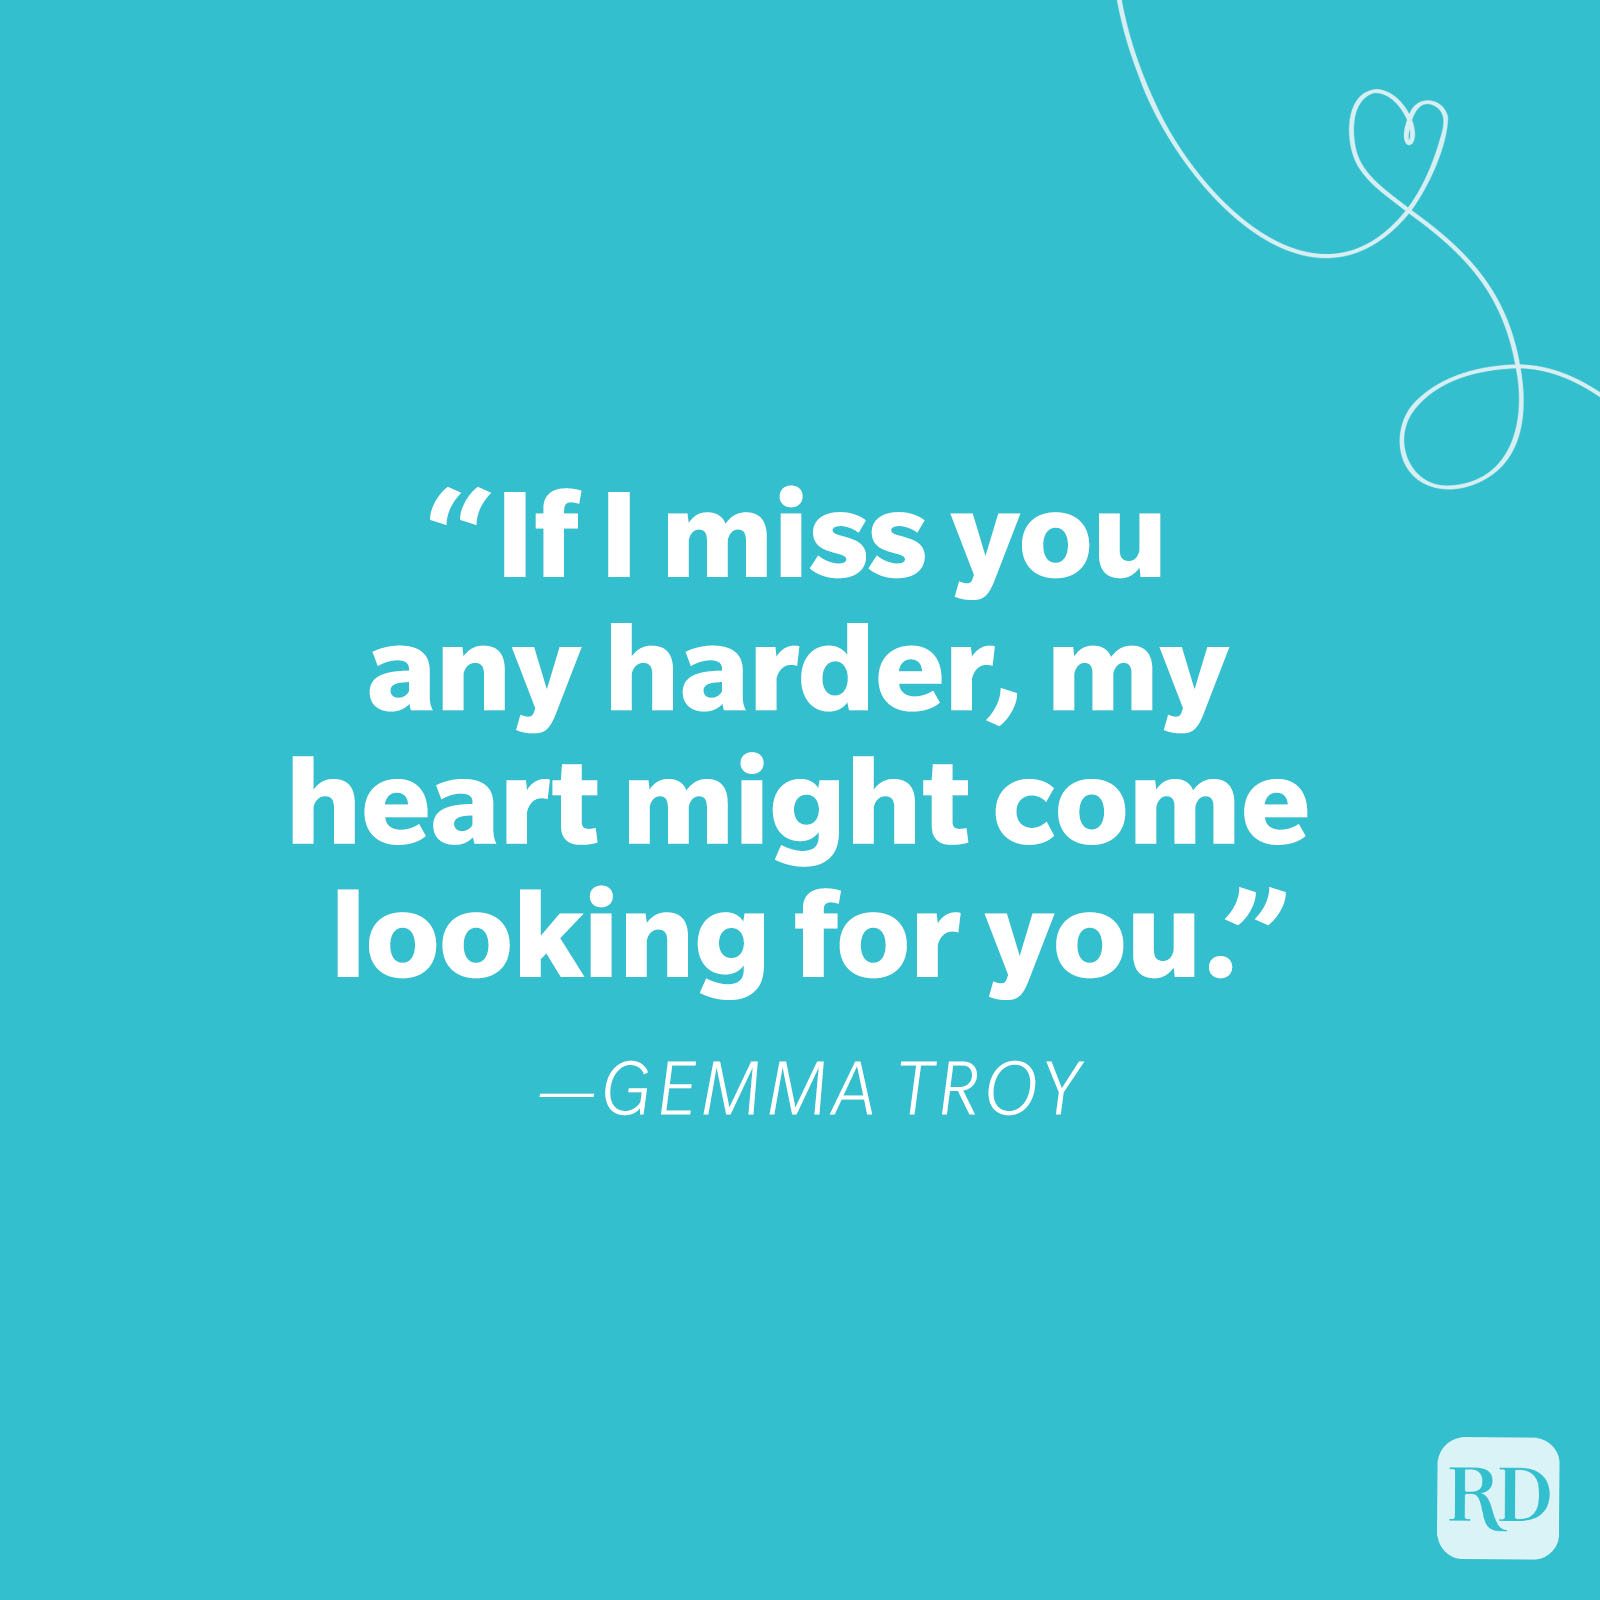 i miss you quotes for him from the heart